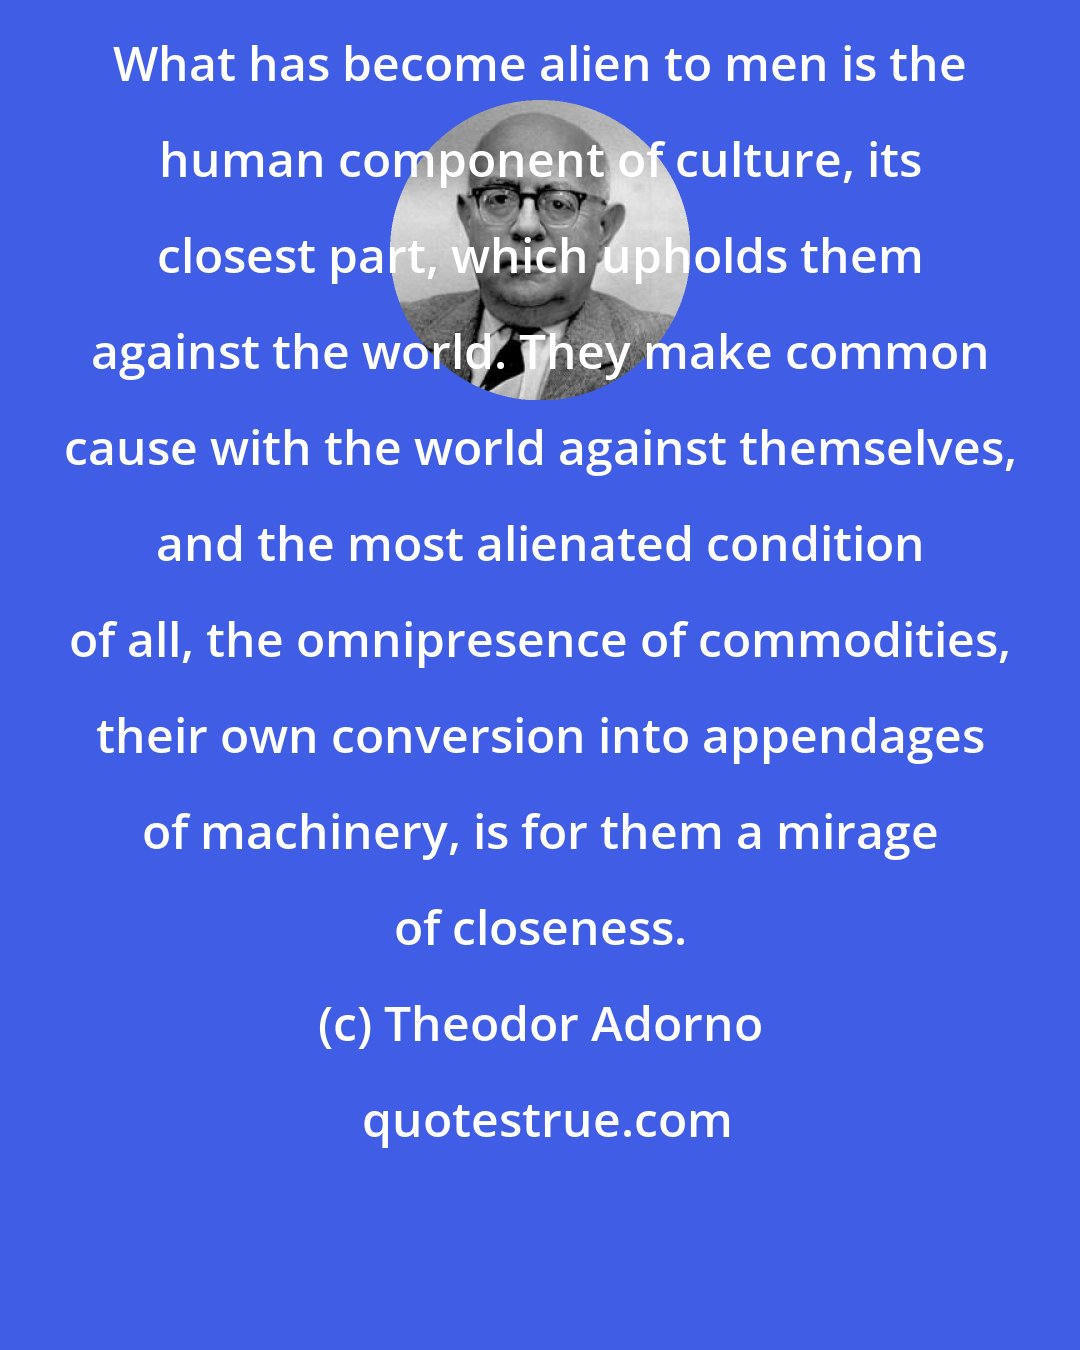 Theodor Adorno: What has become alien to men is the human component of culture, its closest part, which upholds them against the world. They make common cause with the world against themselves, and the most alienated condition of all, the omnipresence of commodities, their own conversion into appendages of machinery, is for them a mirage of closeness.